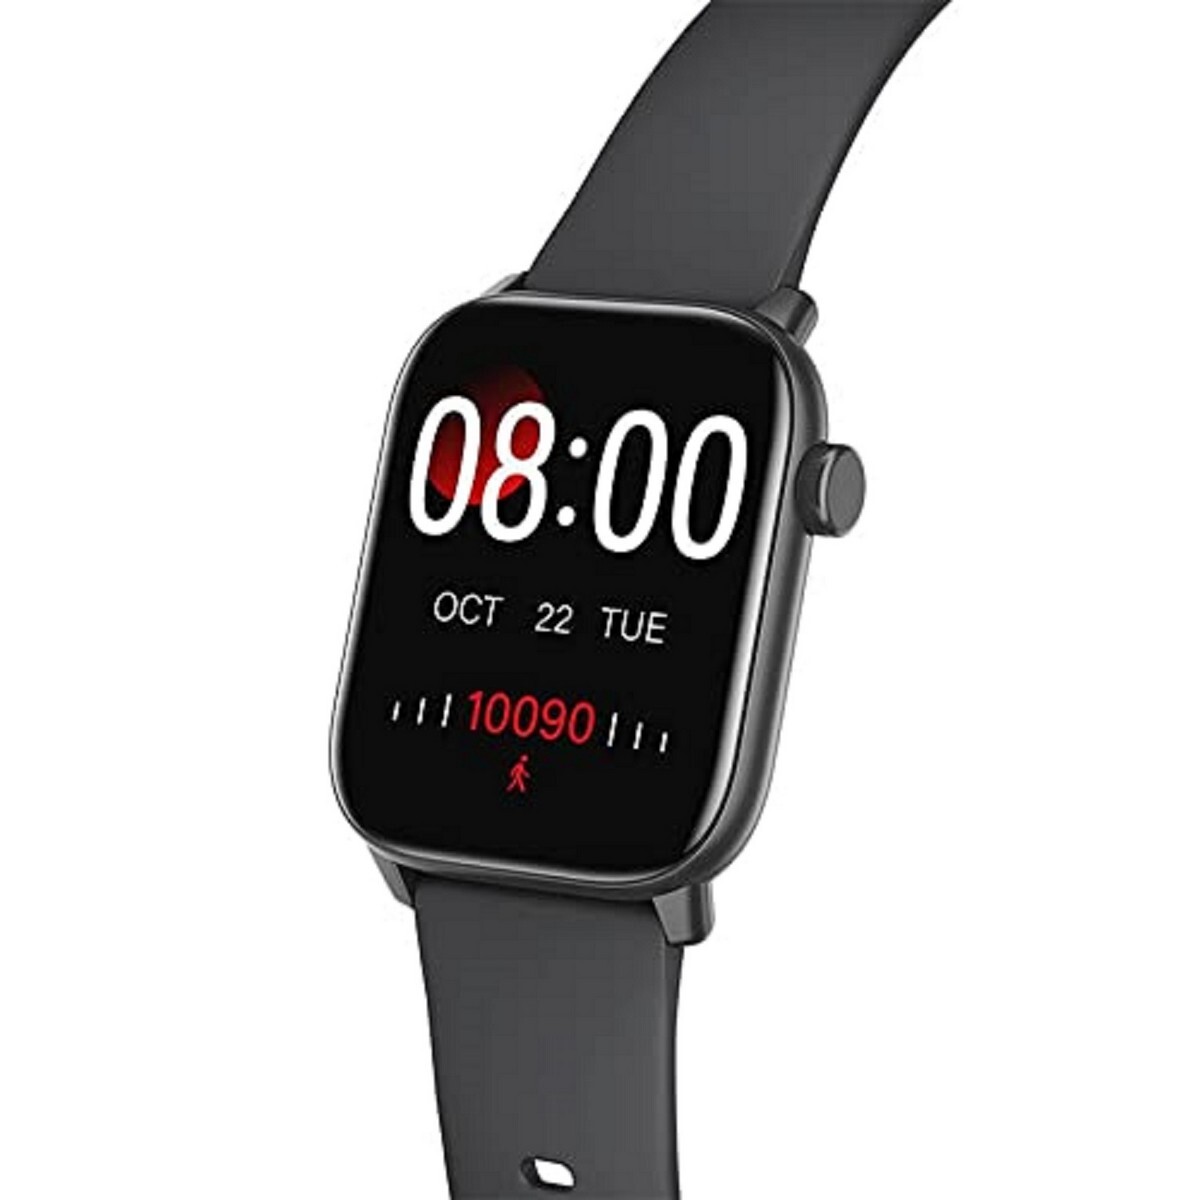 Hoco Smart watch Y3,8 sports modes, heart rate and sleep monitoring, sedentary reminder, 13 languages, multiple dials to choose